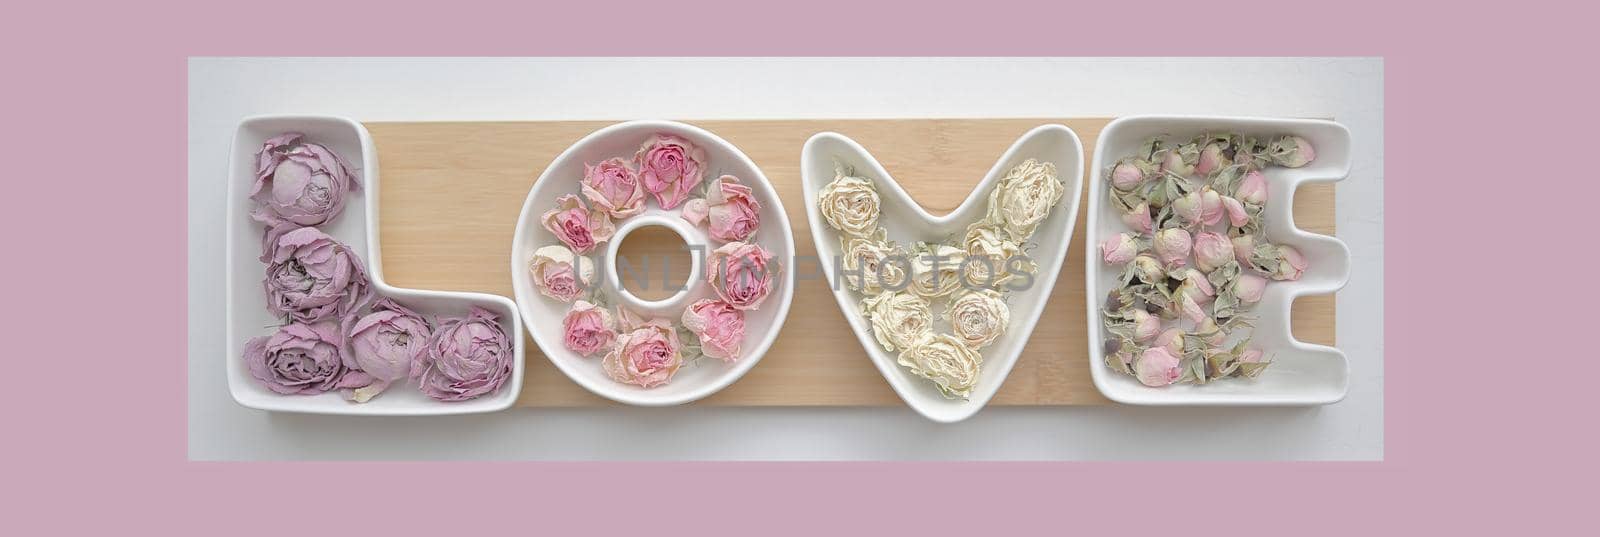 Valentine's day and love concept. The word love is made up of white porcelain molds filled with rosebuds against a soft delicate pink background. by Proxima13